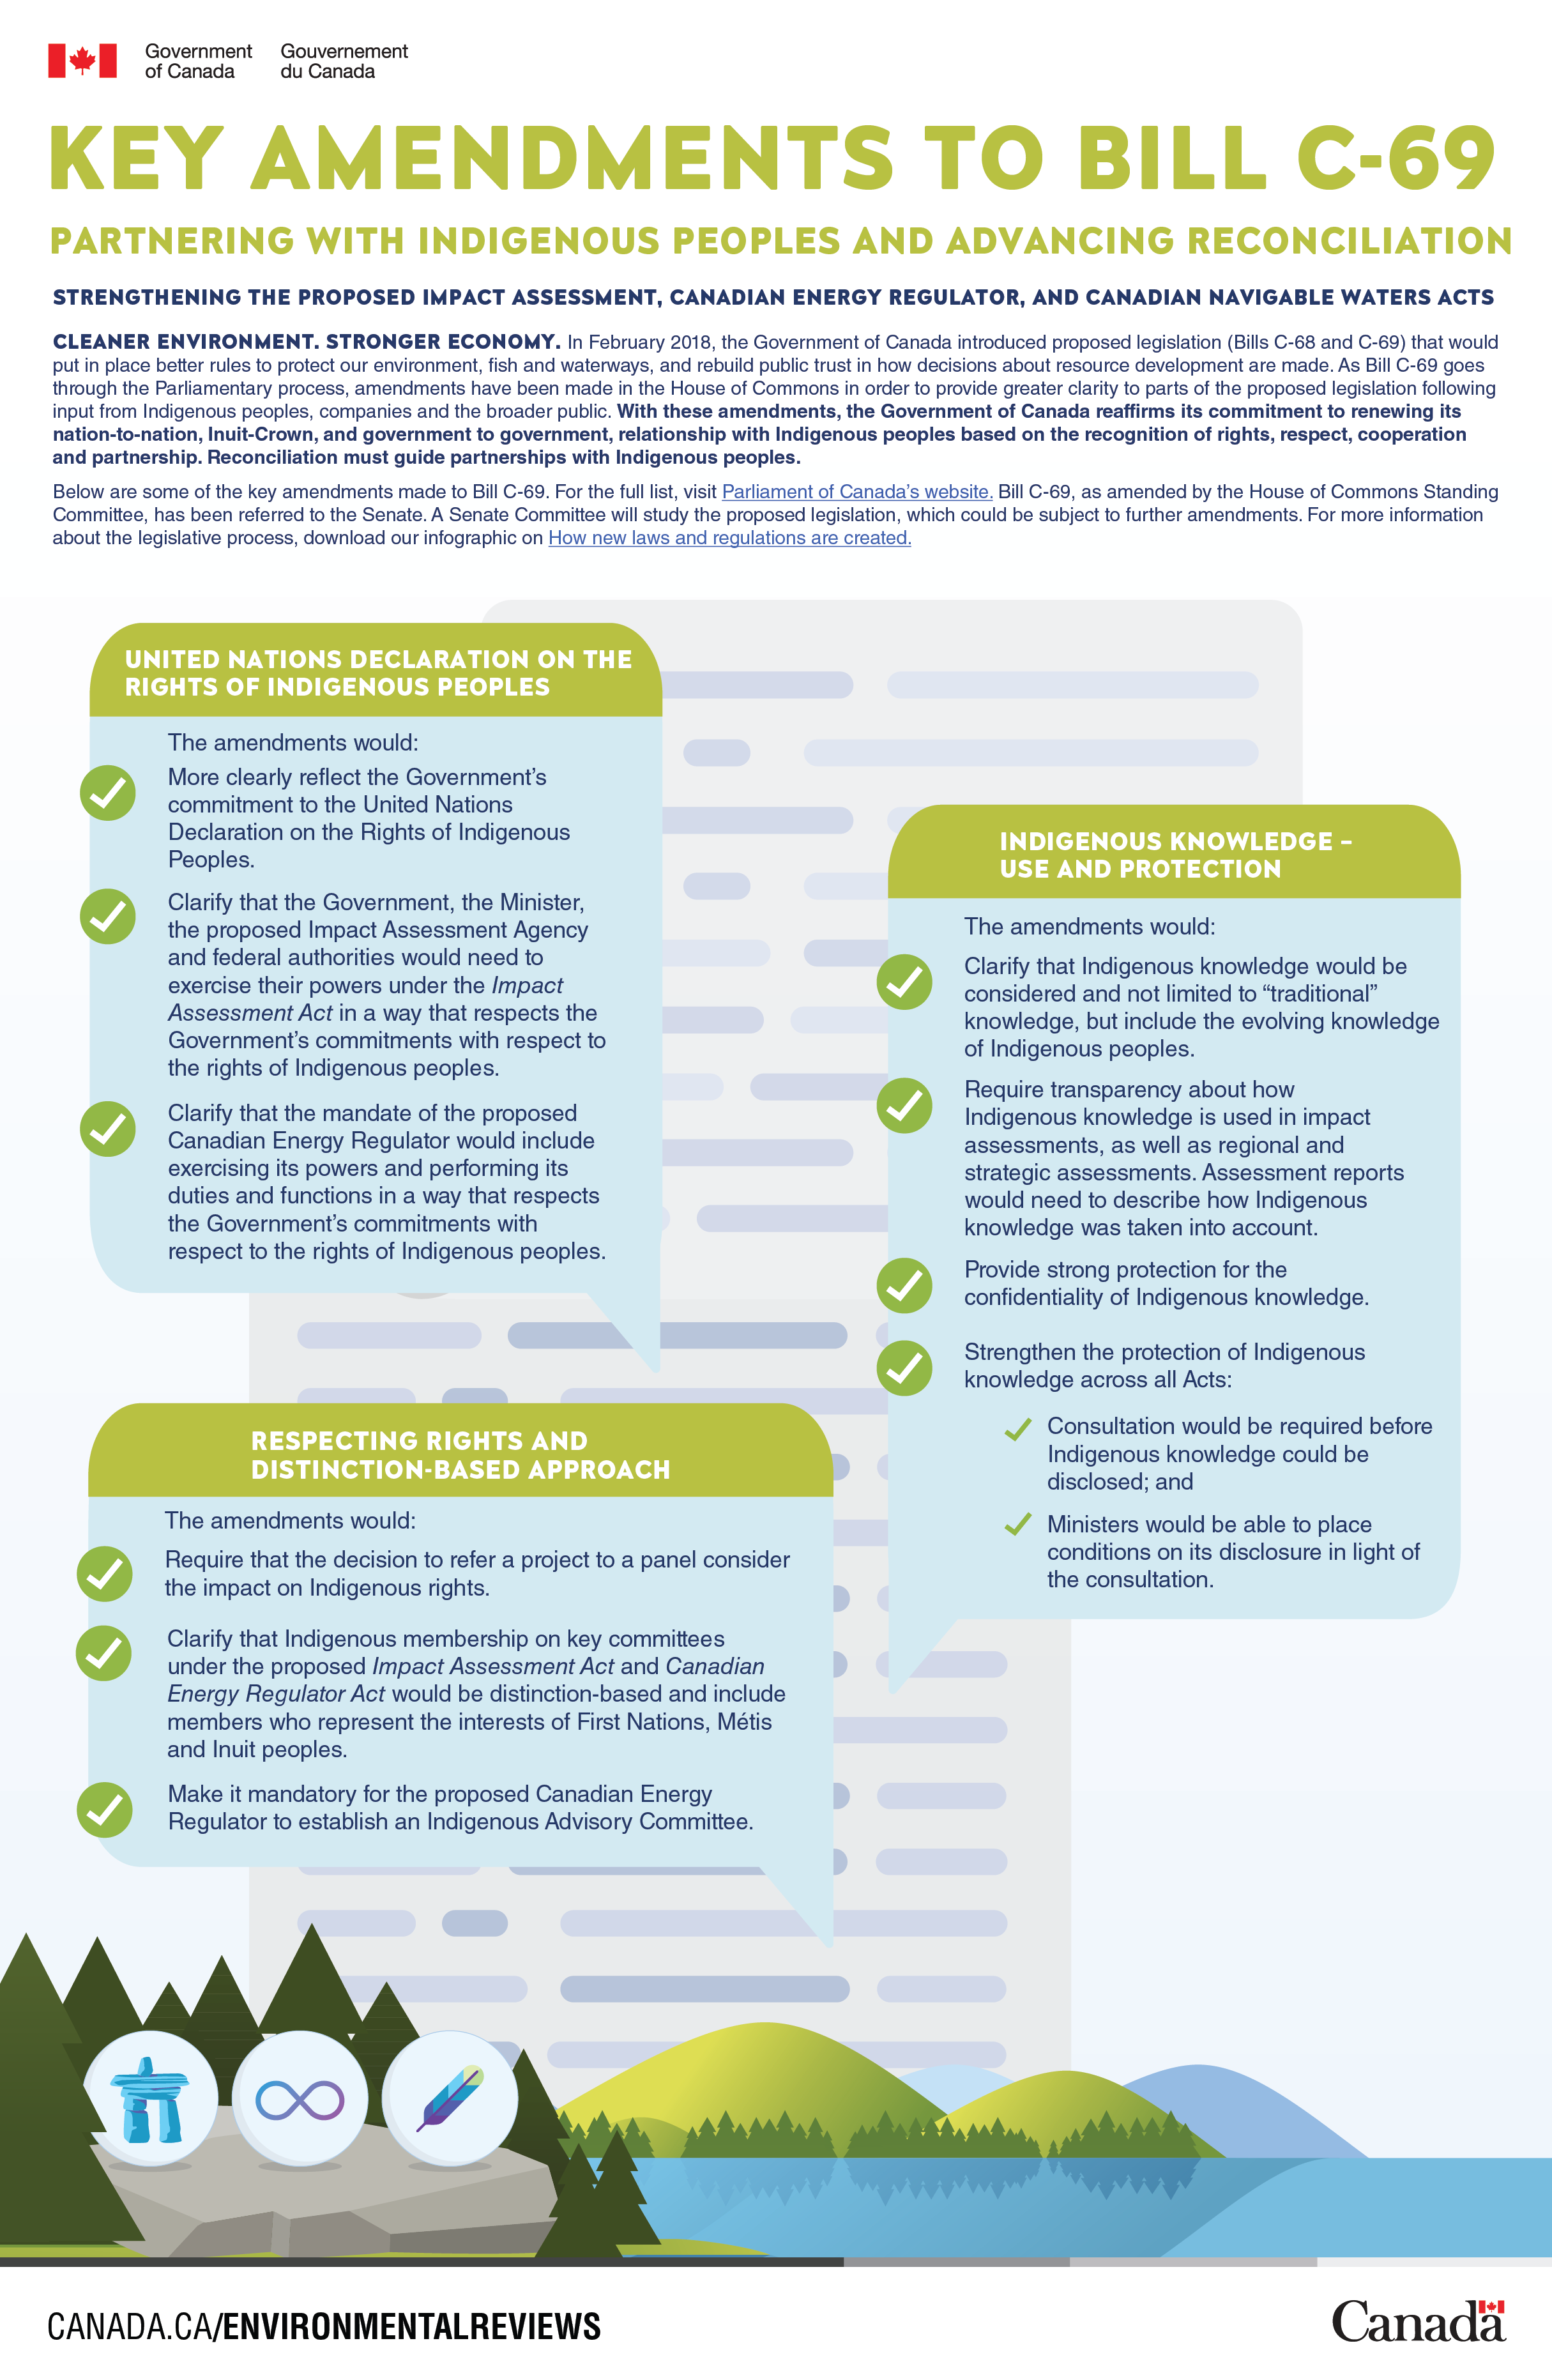 Infographic: Key amendments to Bill C-69 for Indigenous communities